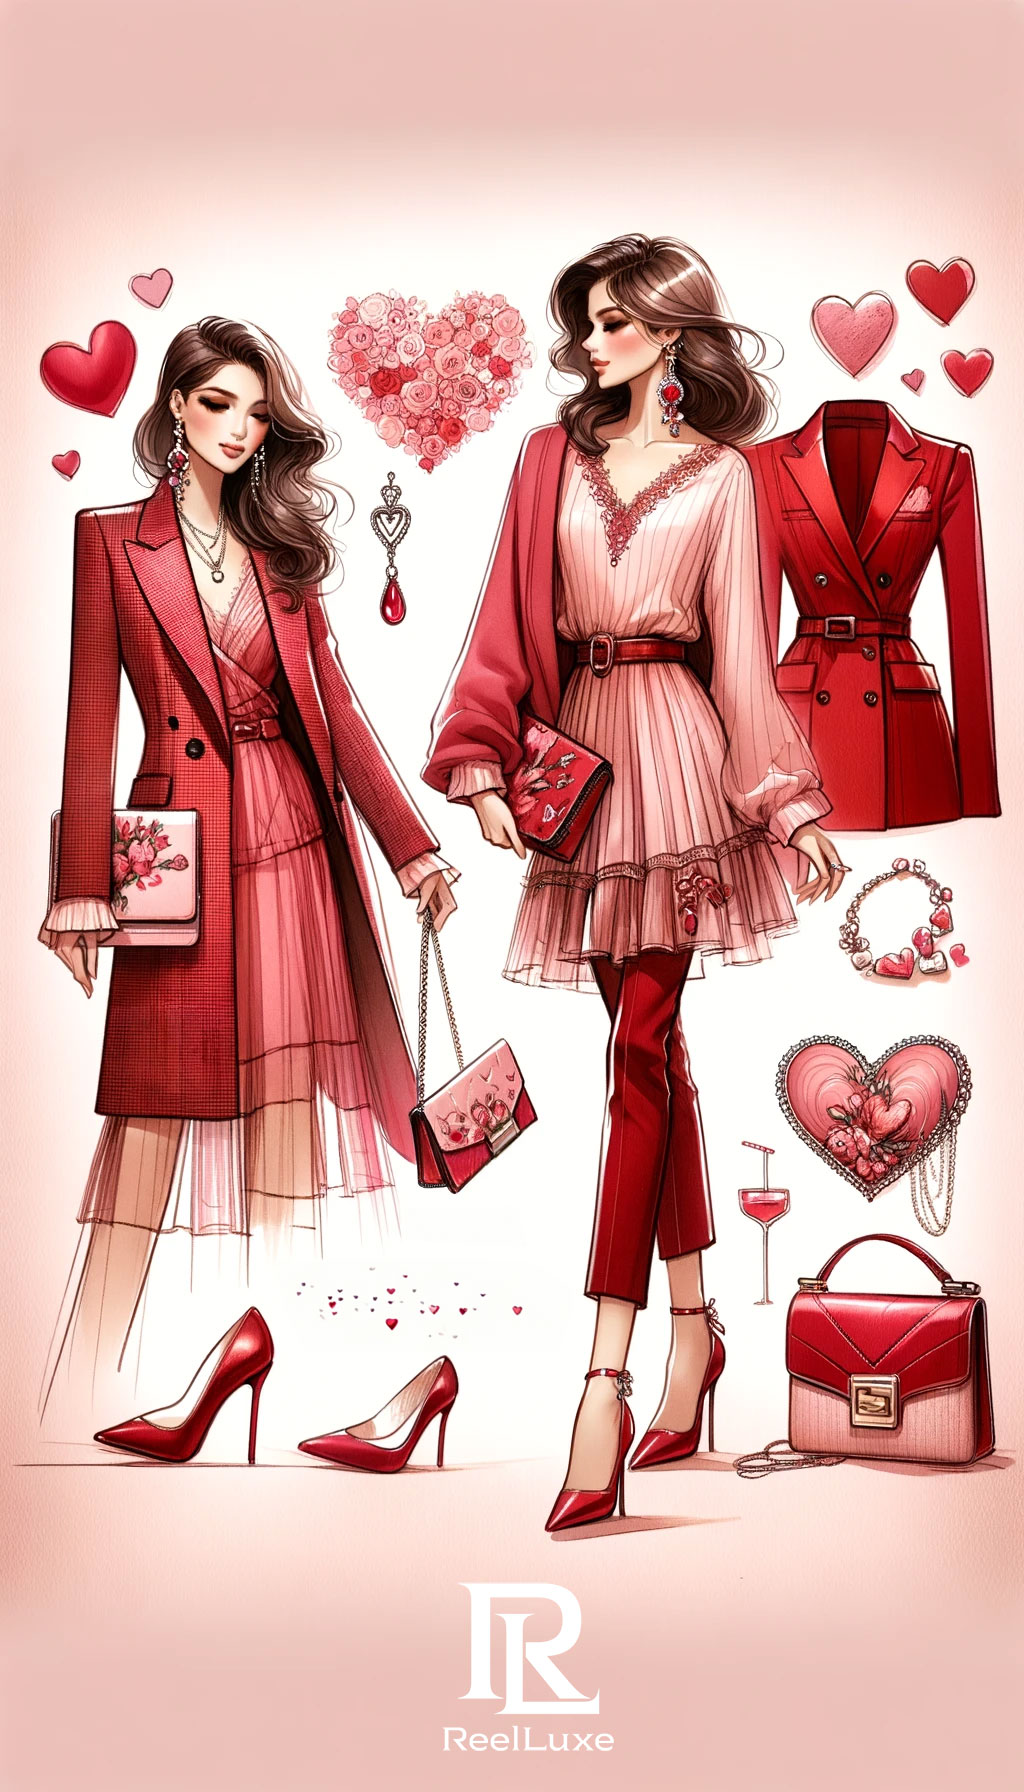 Romance in the Air - Valentine's Day - Beauty and Fashion - 11